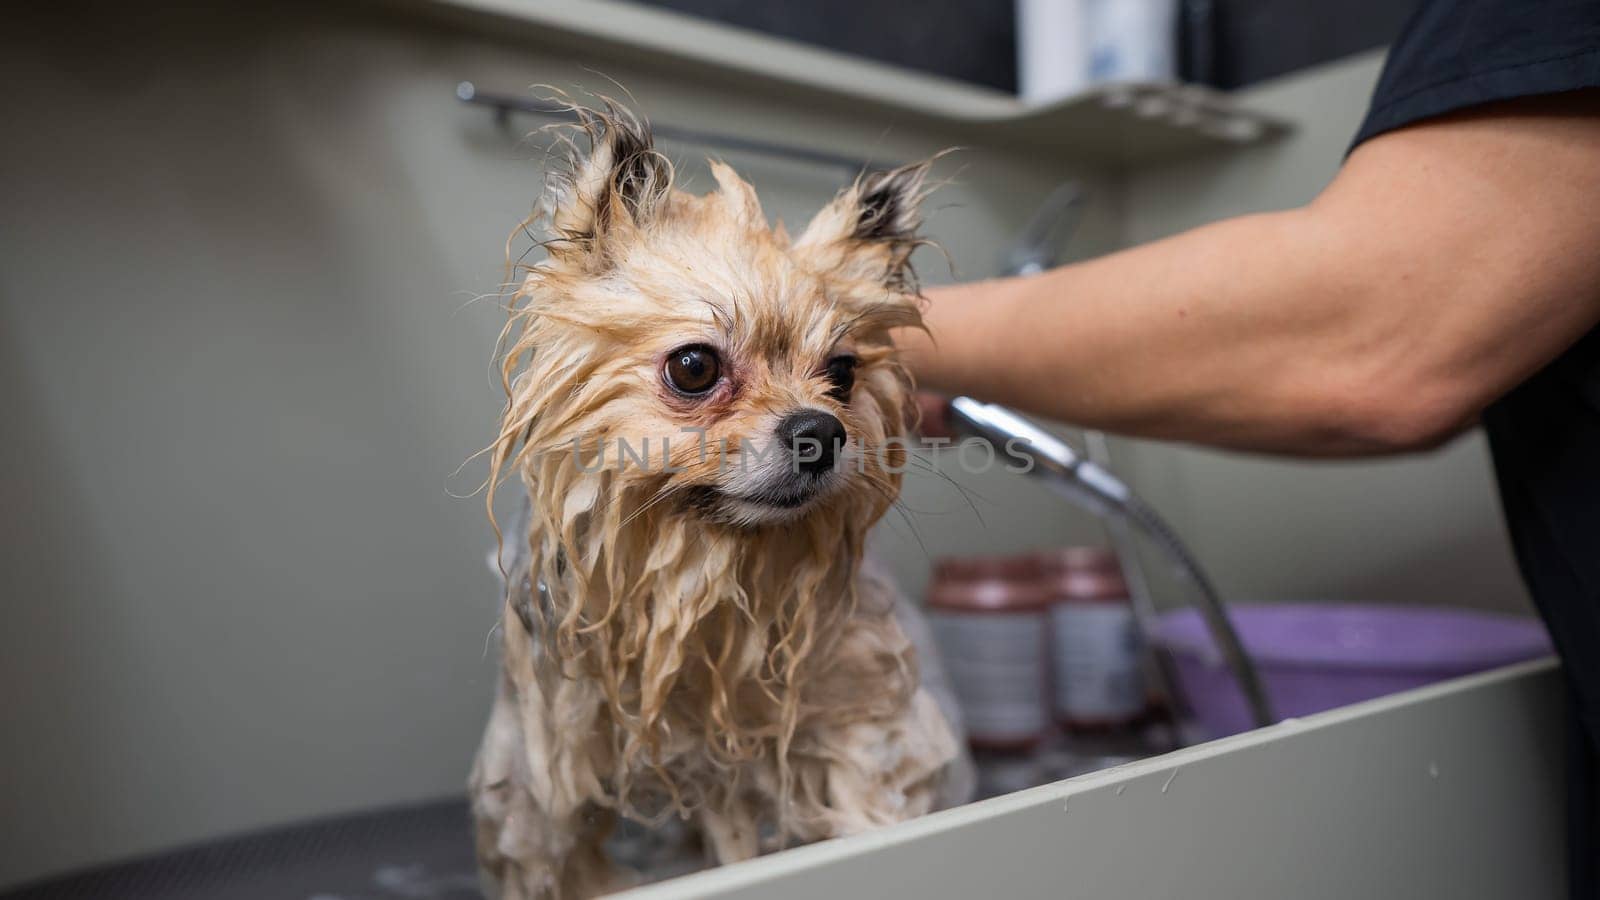 A woman showers a cute Pomeranian dog in a grooming salon. by mrwed54